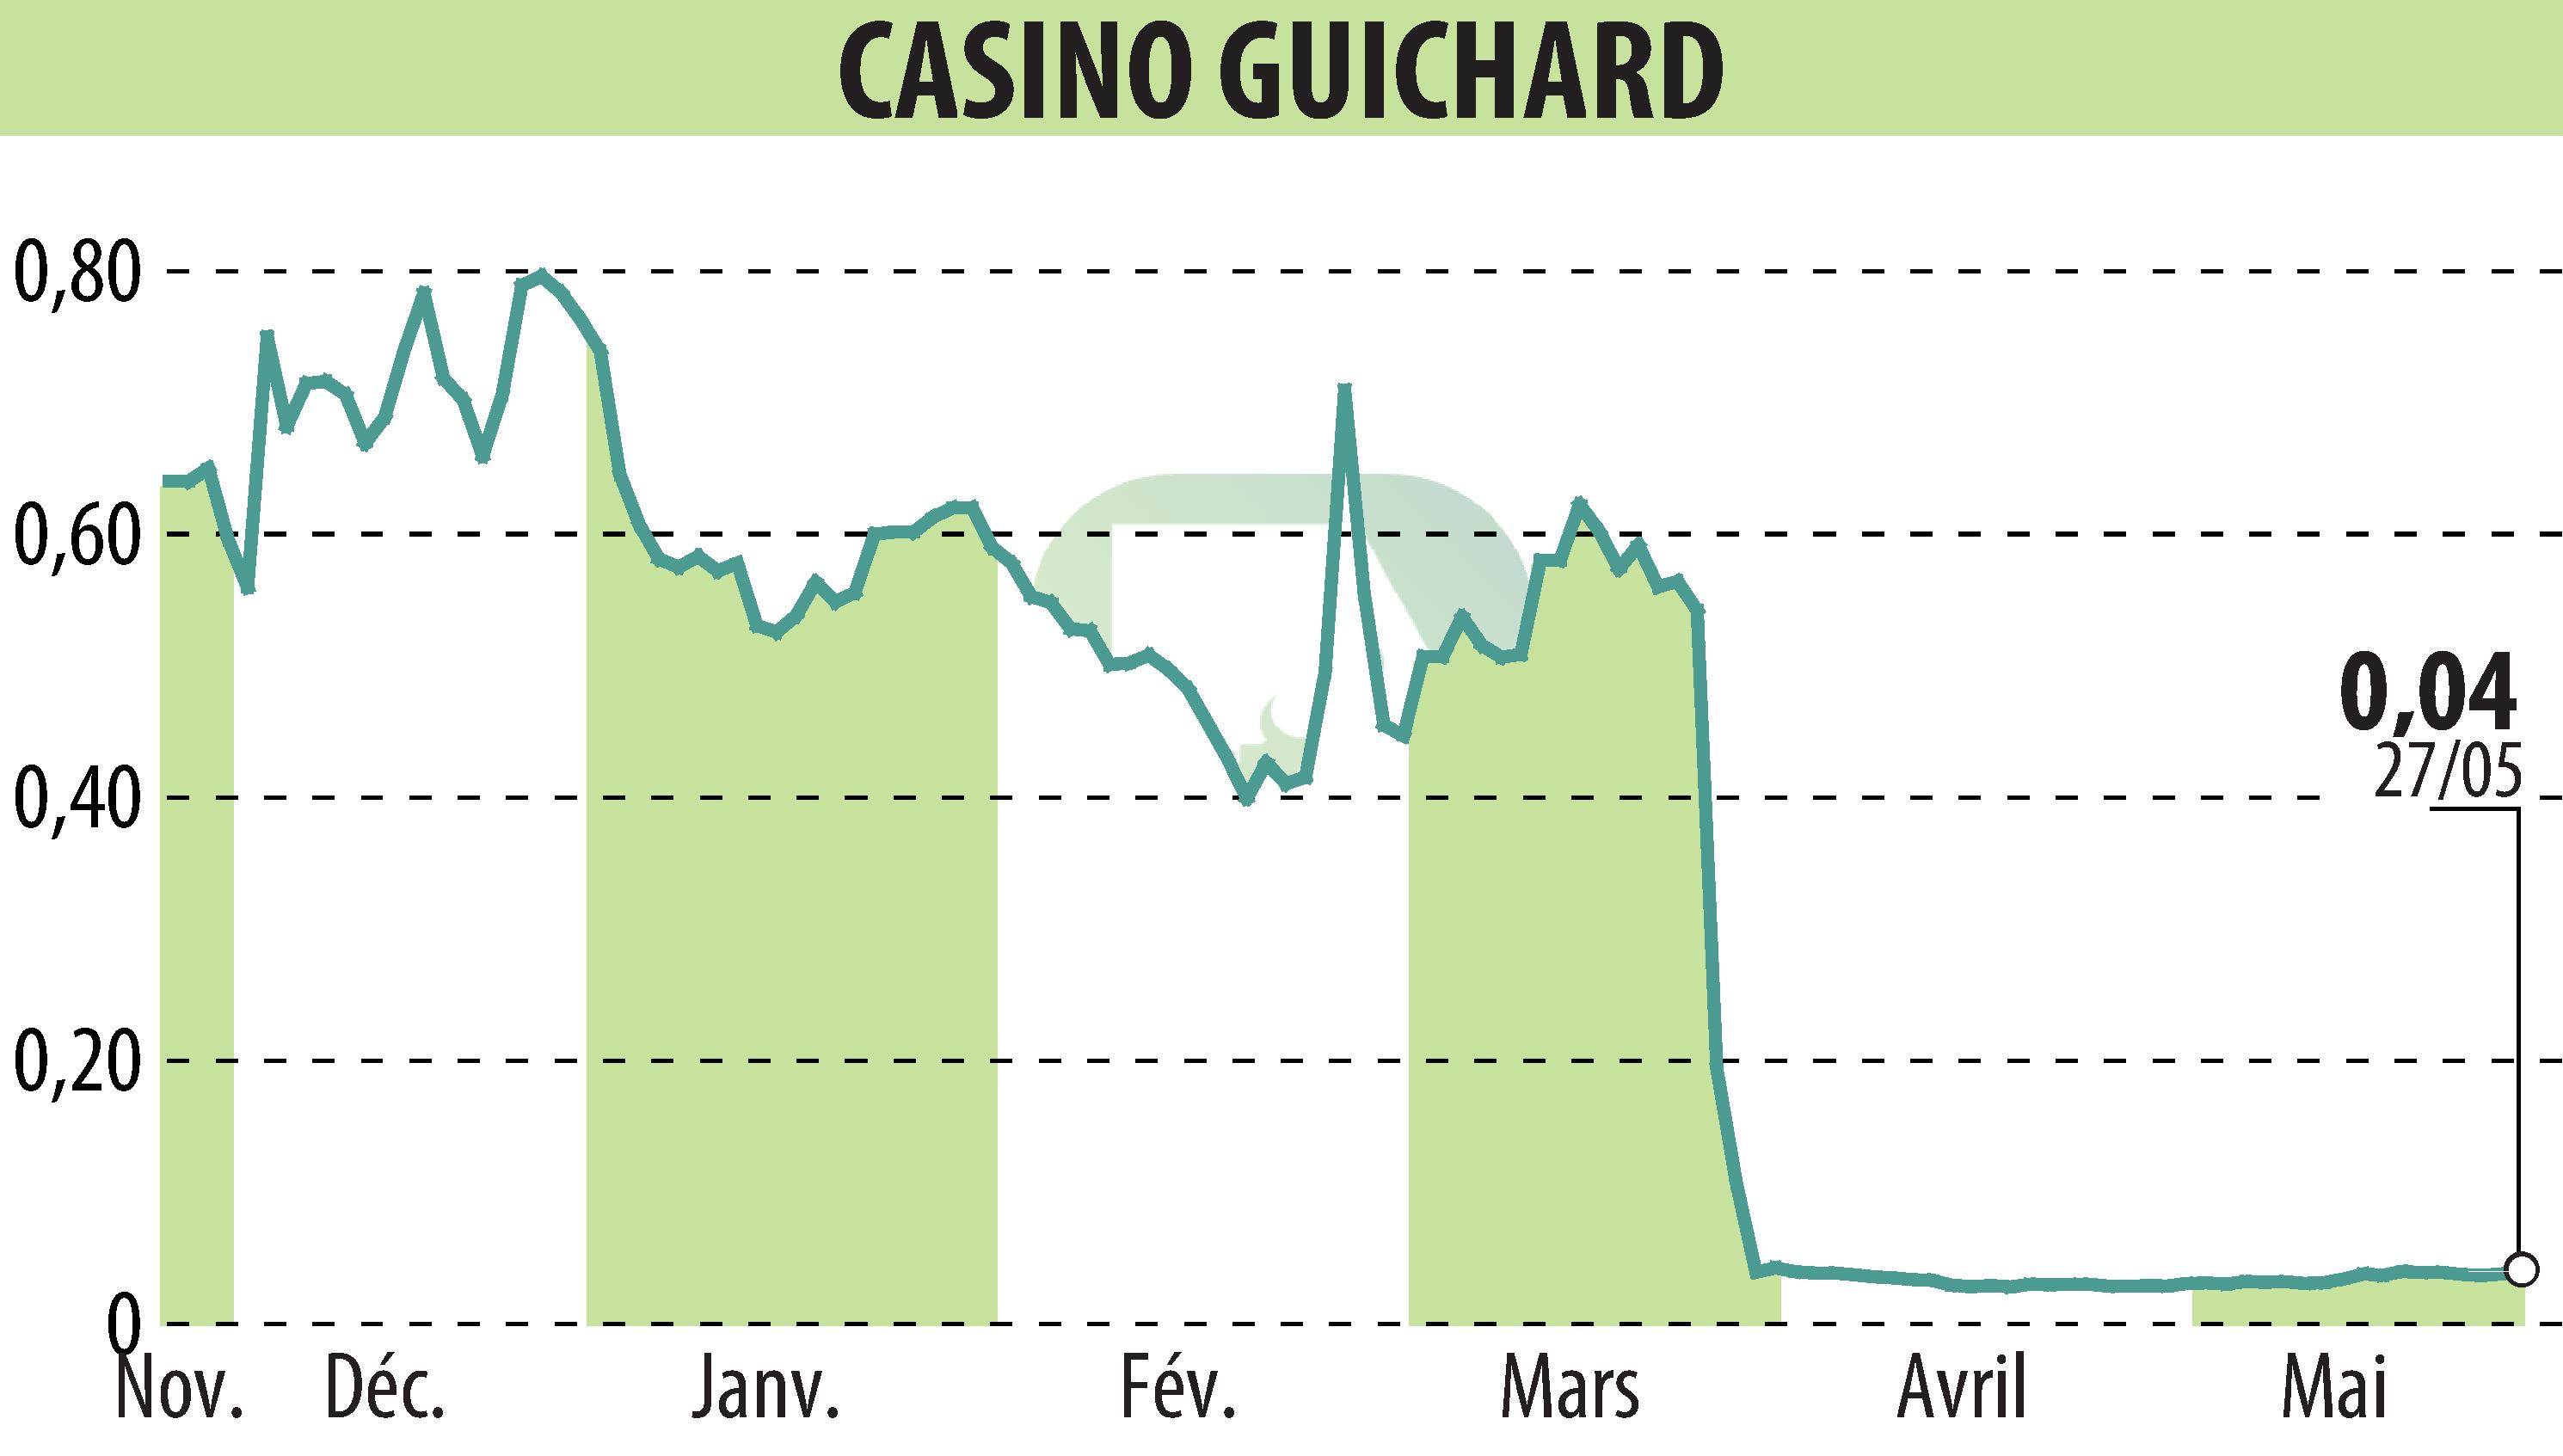 Stock price chart of CASINO GUICHARD PERRACHON (EPA:CO) showing fluctuations.